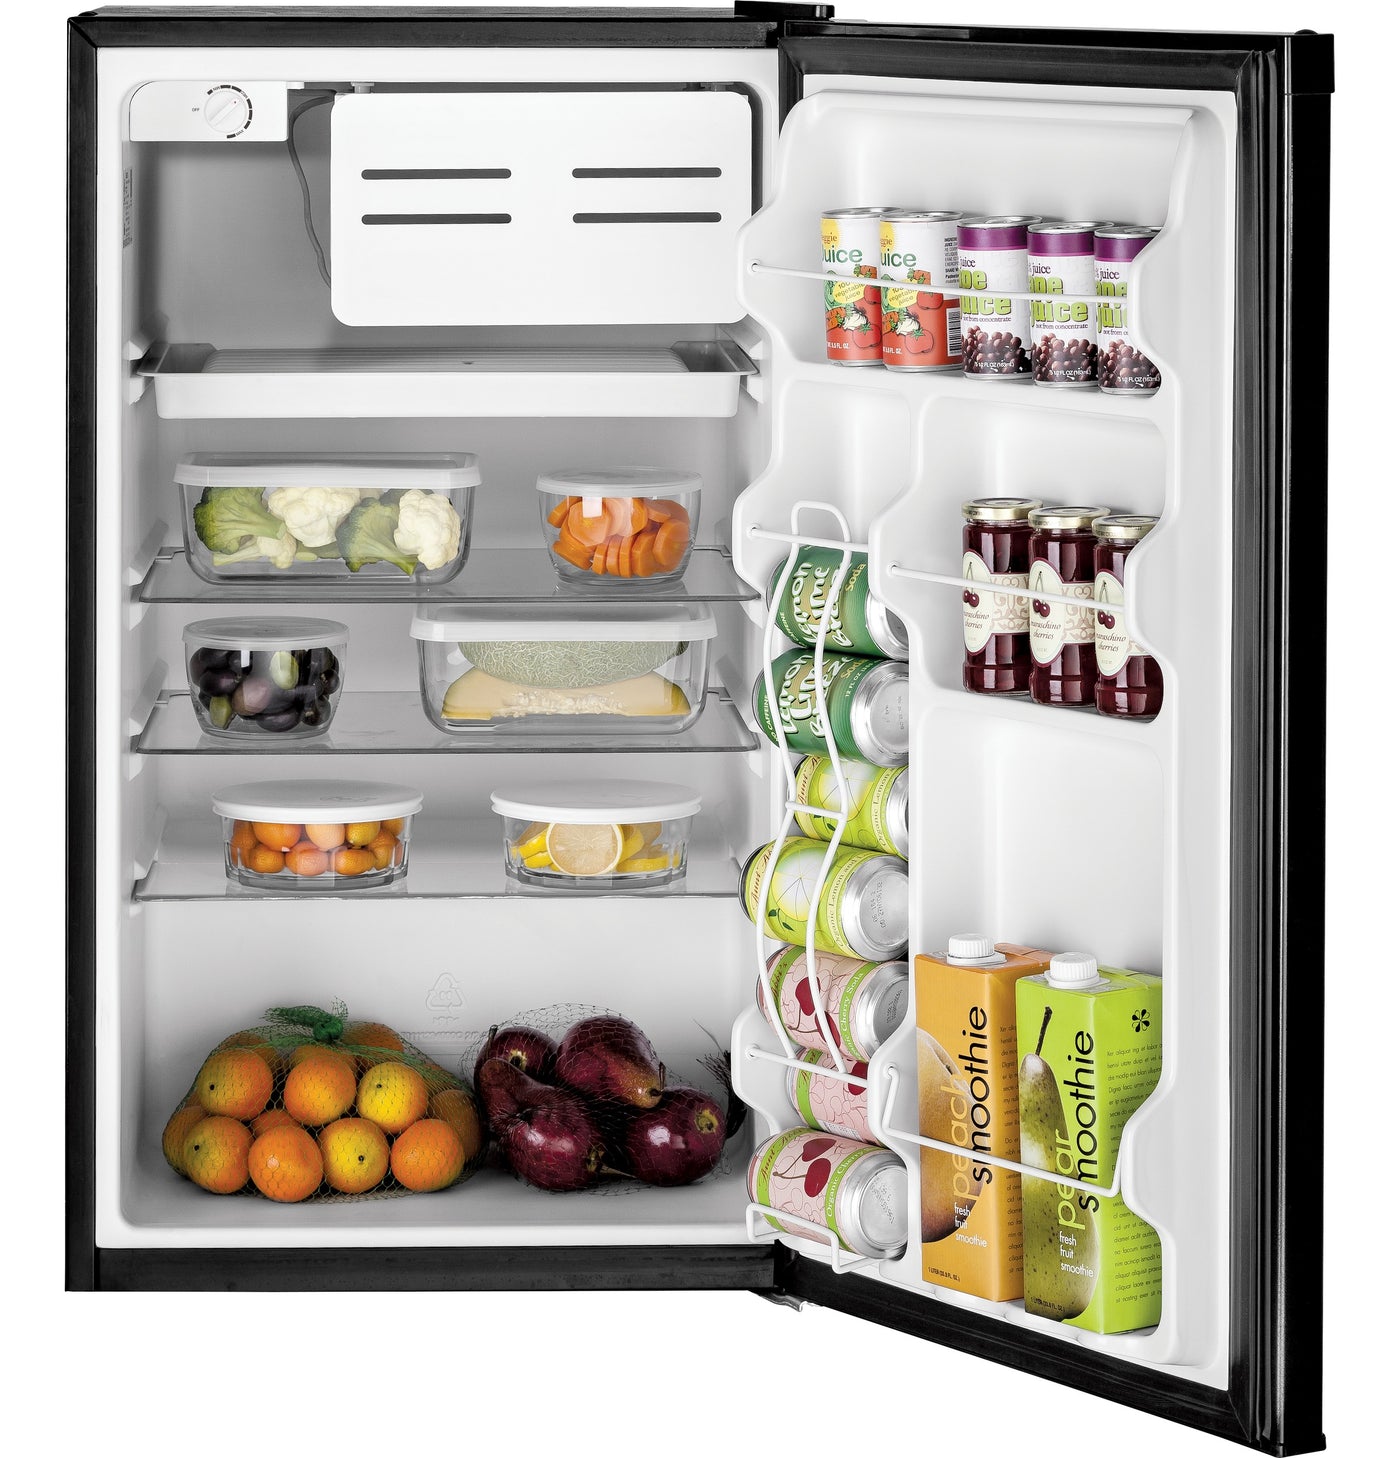 GE Appliances GME04GGKBB Compact Refrigerator with Freezer 4.4 Cu. Ft with 1-Year Warranty